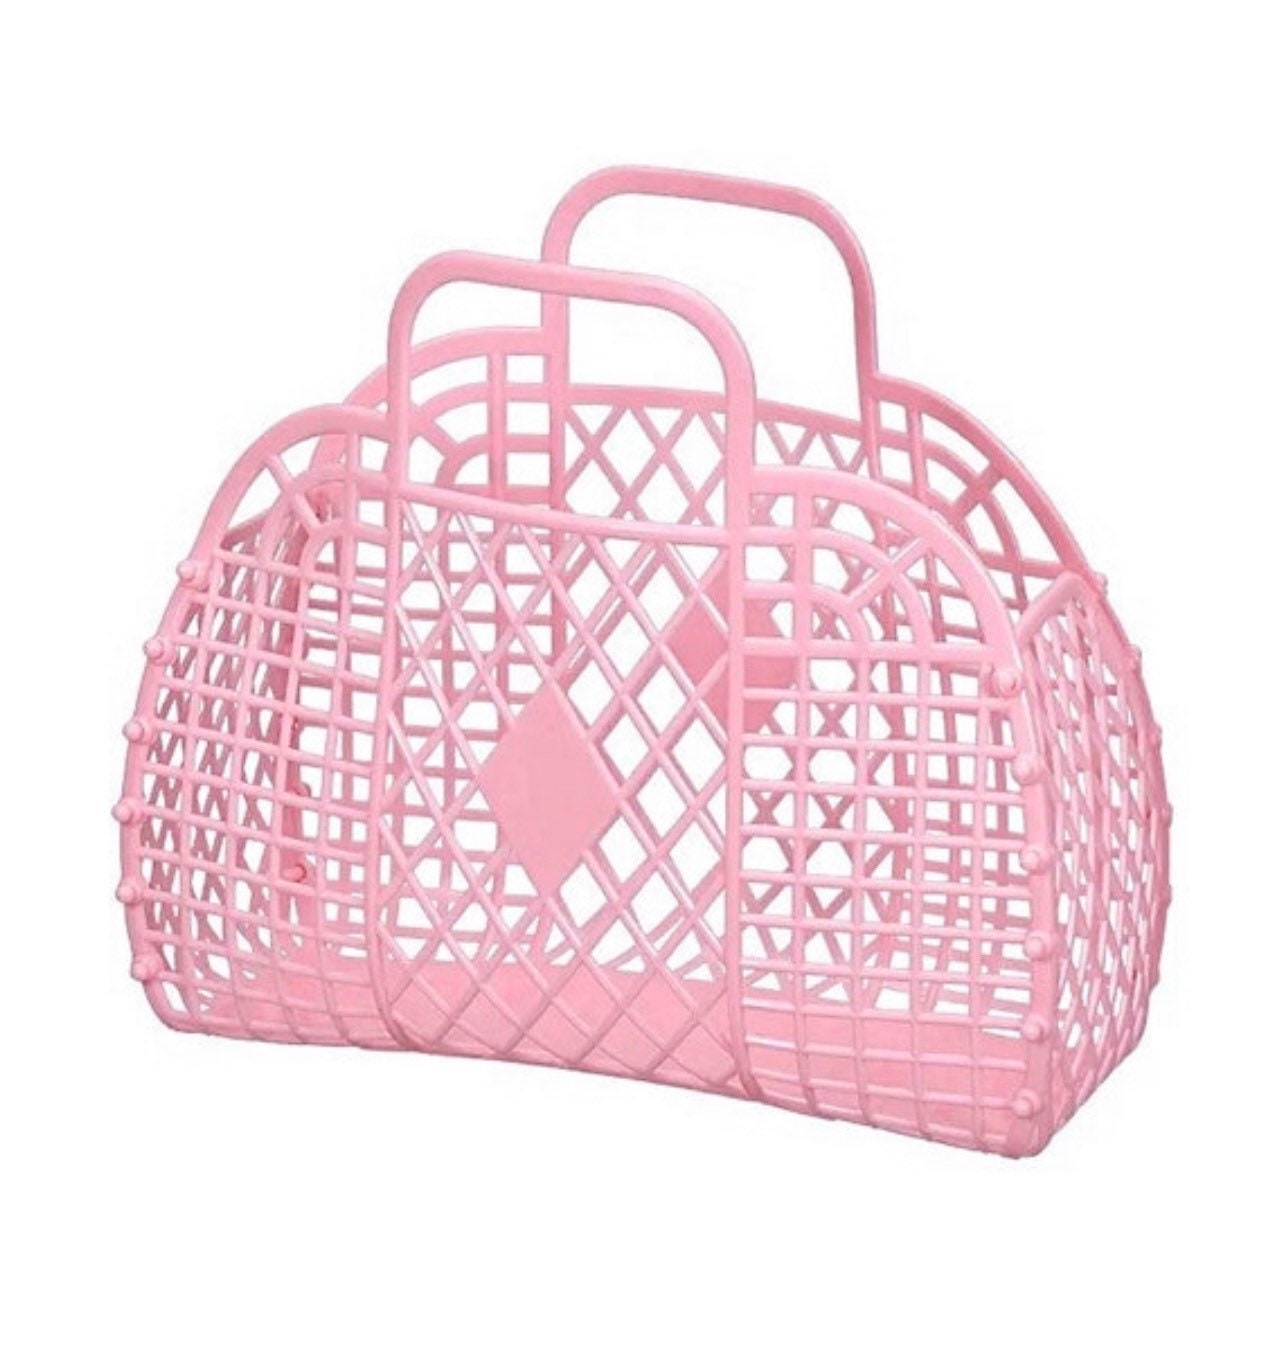 Jelly Bag Price Sale Online, SAVE 51%.